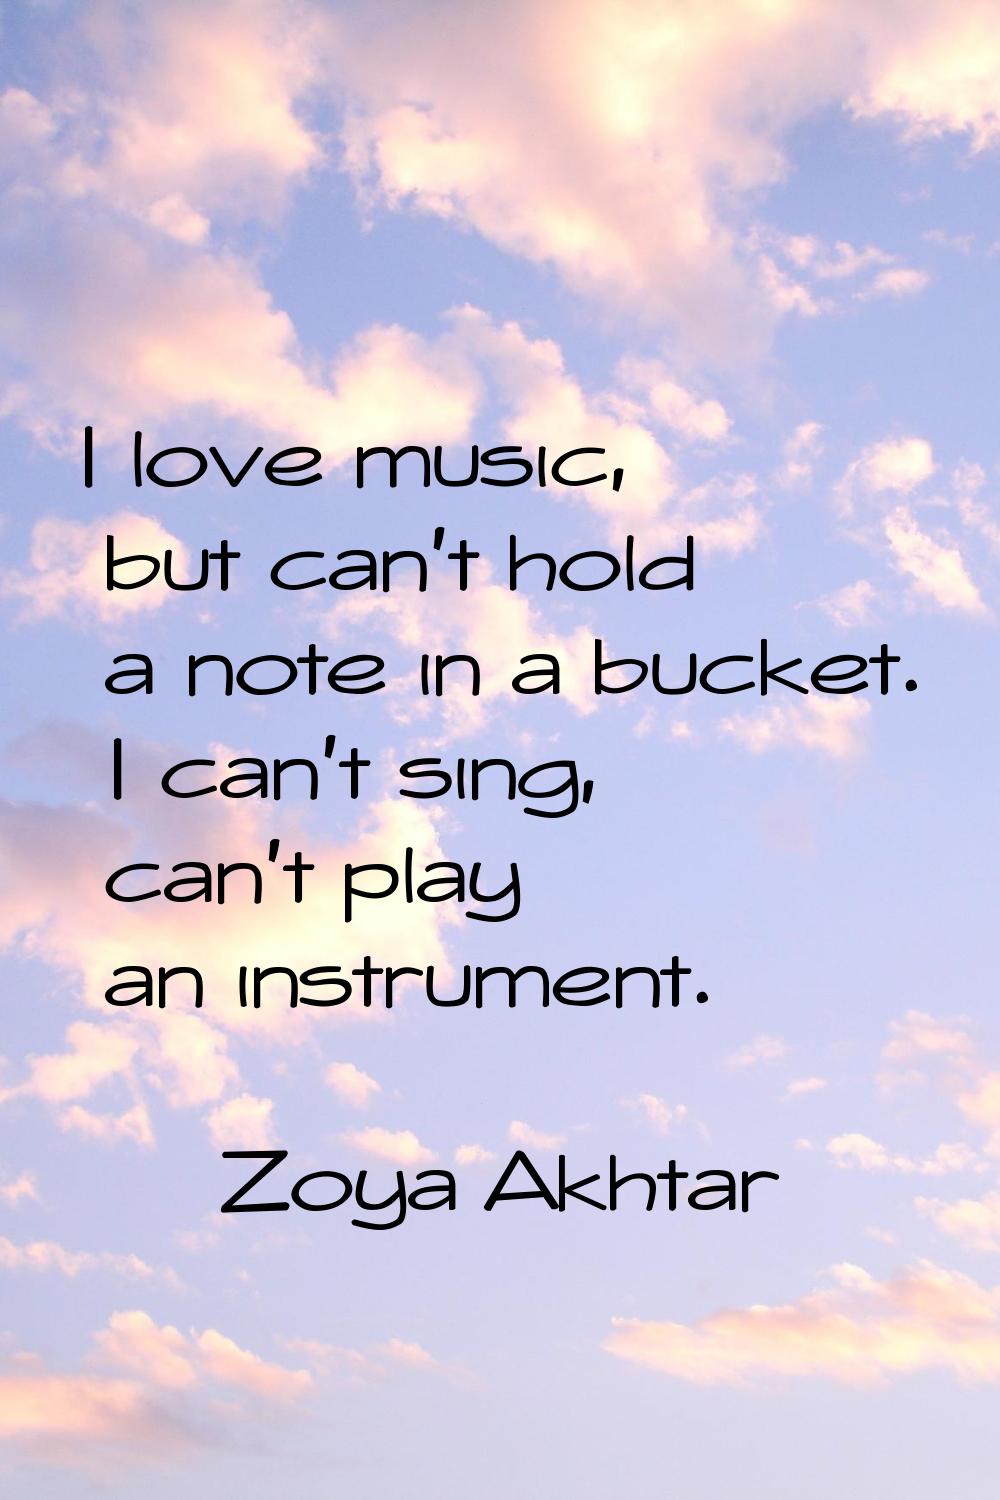 I love music, but can't hold a note in a bucket. I can't sing, can't play an instrument.